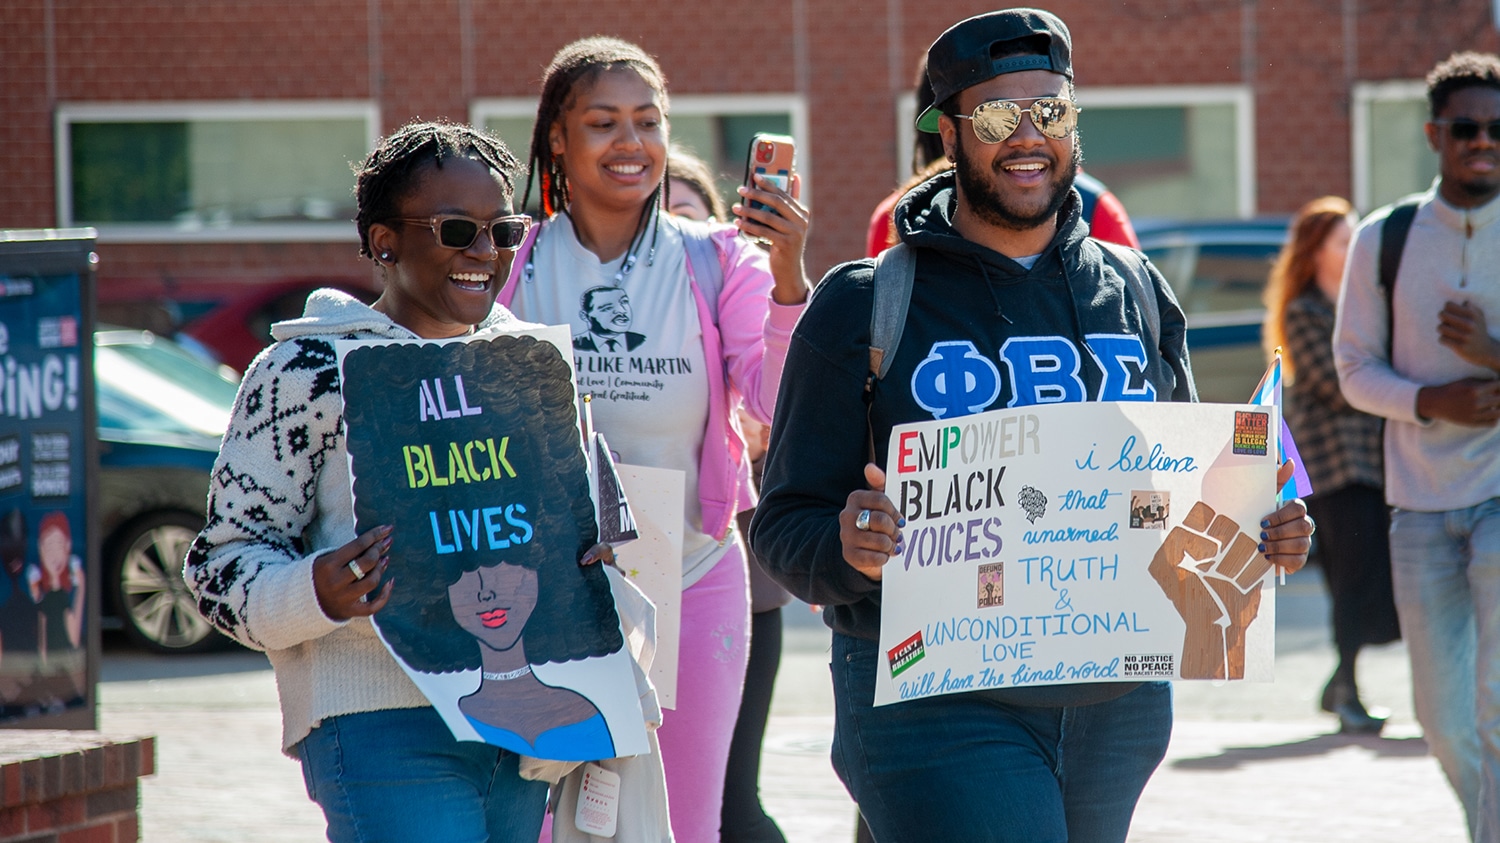 Students hold up posters at the March Like Martin 2023 event.